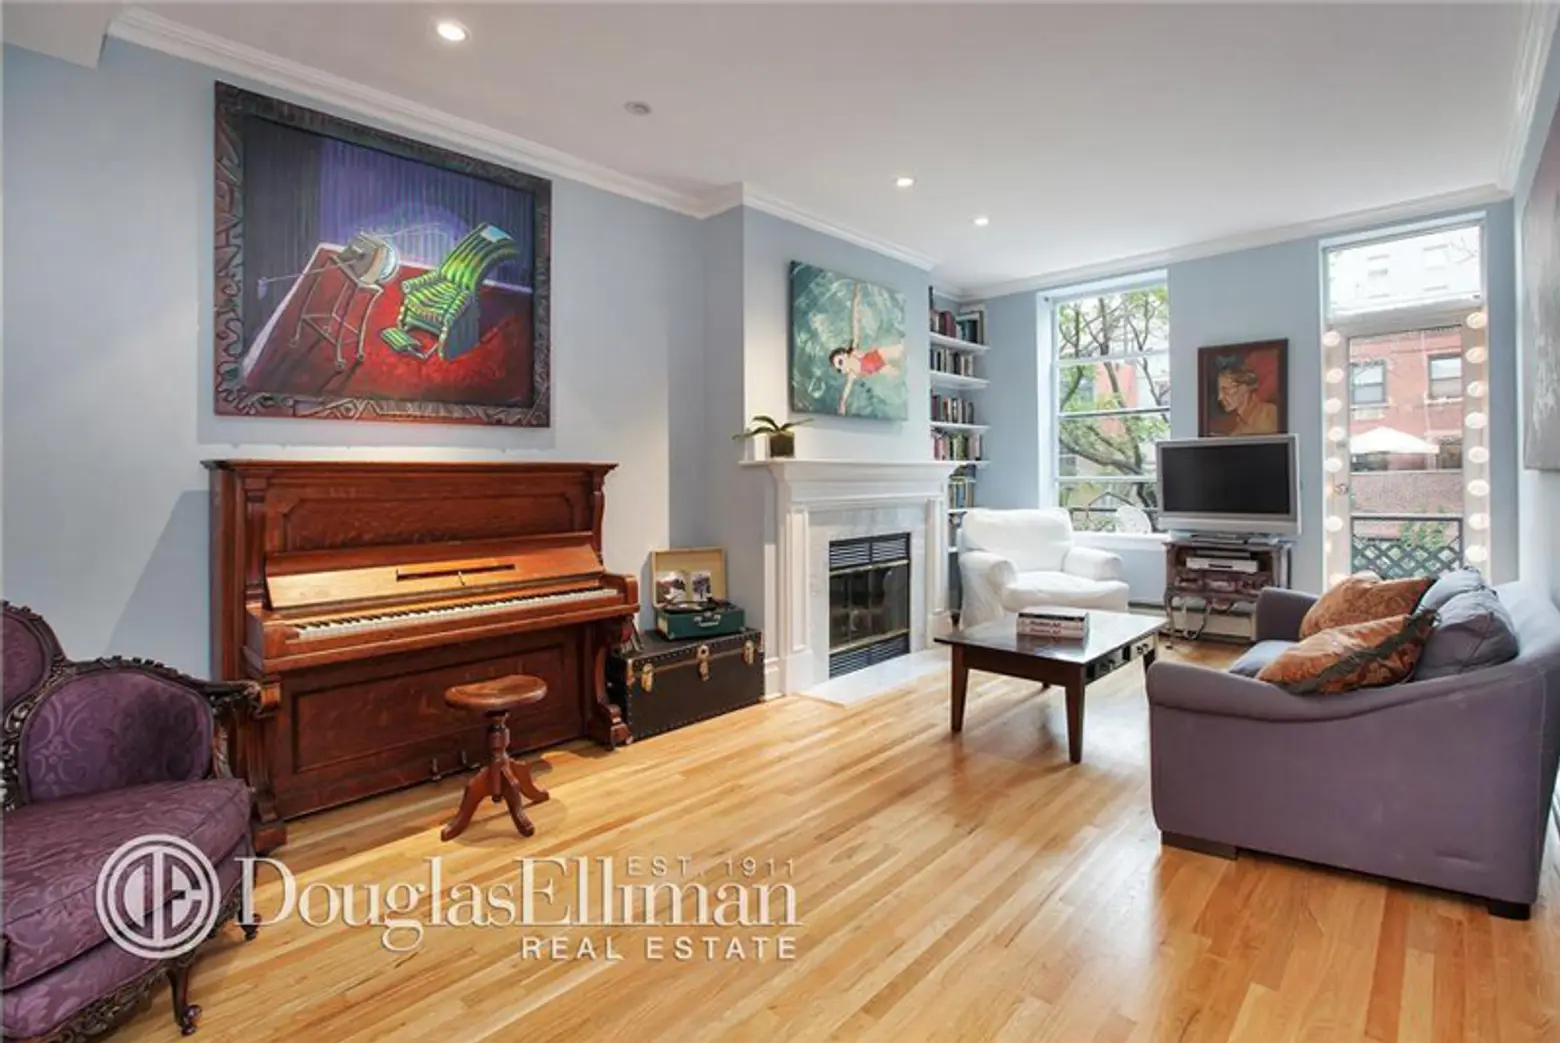 Actress Julia Stiles Sells Off Her Gramercy Apartment for $2.75M